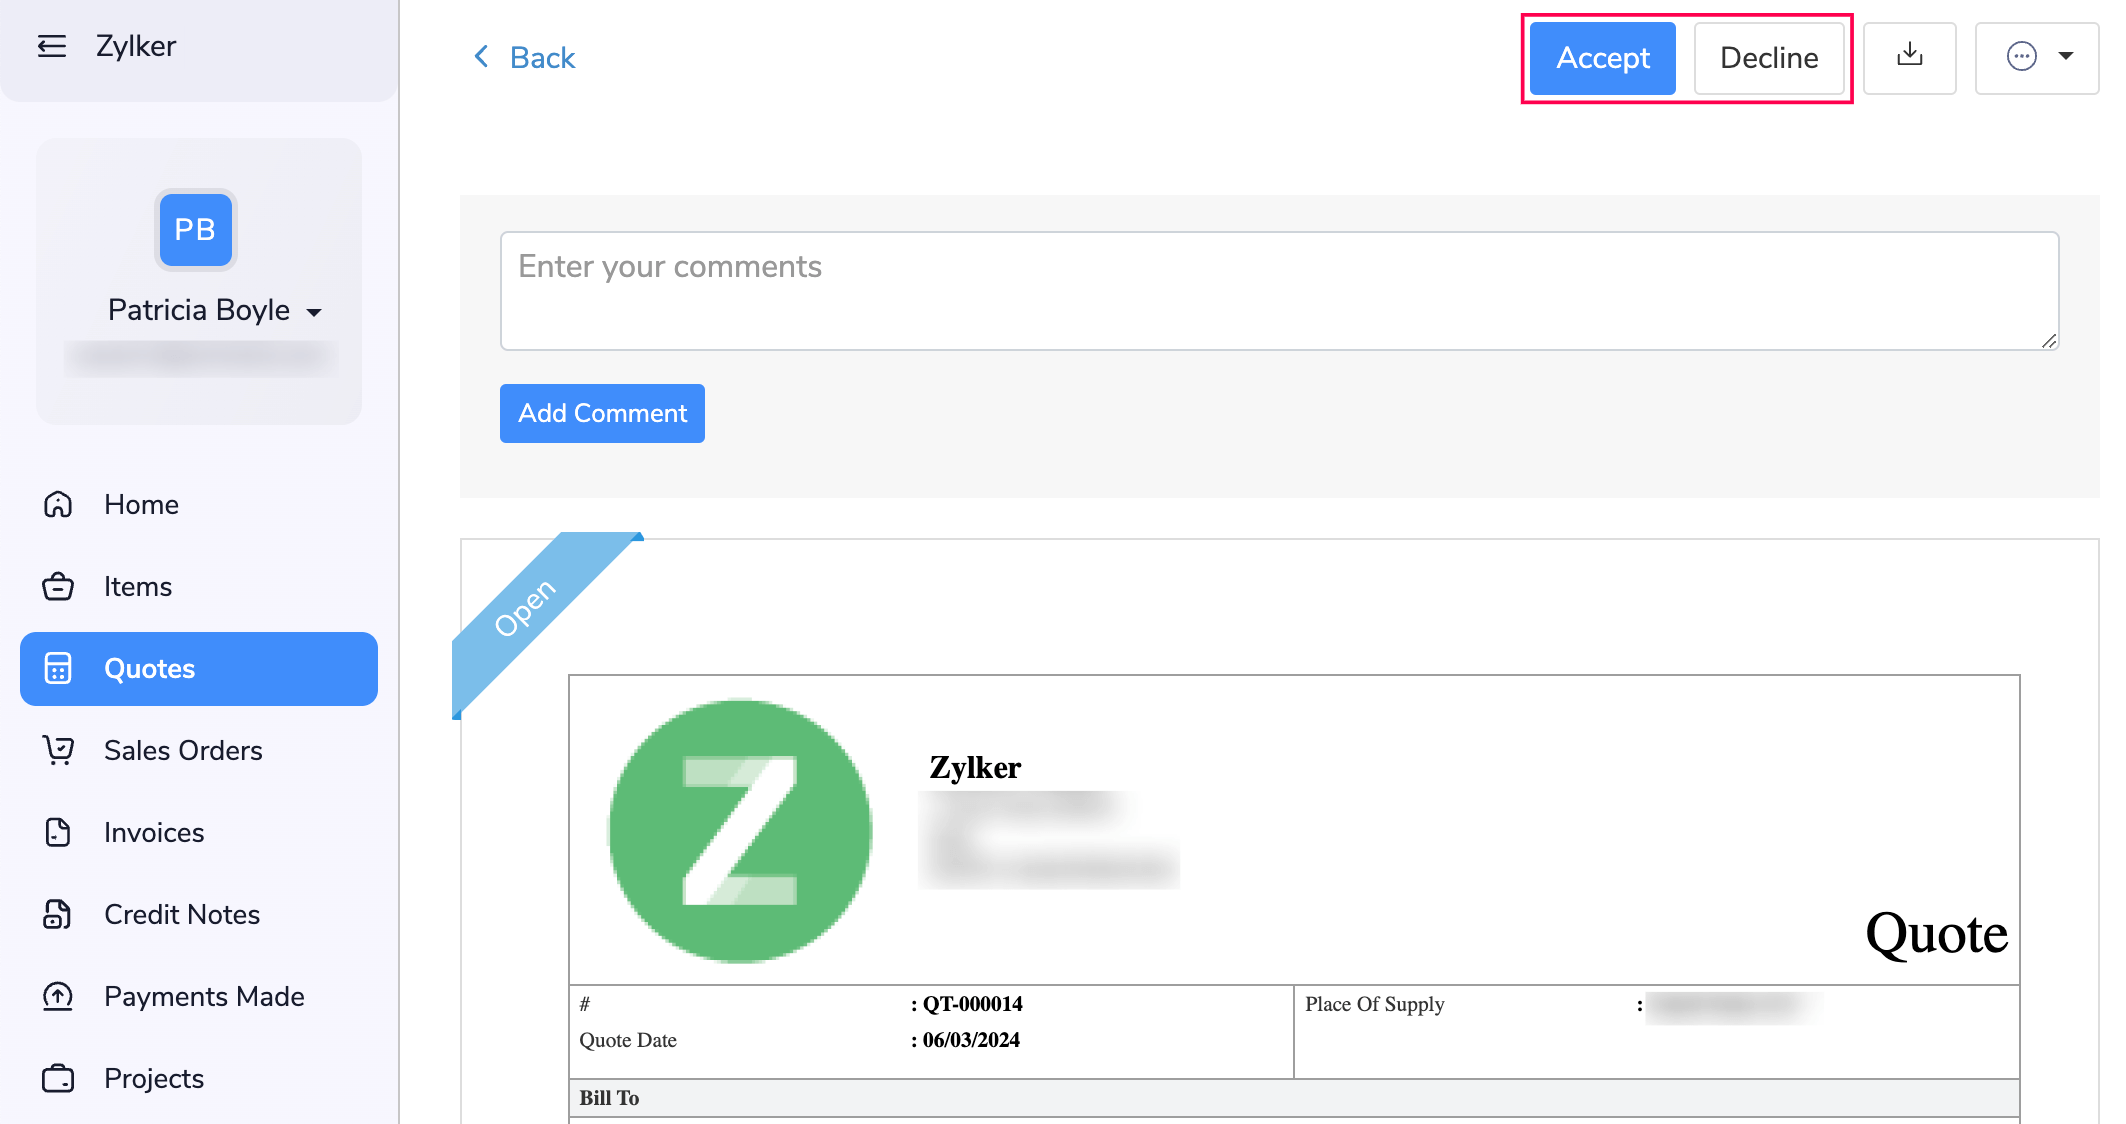 Accept and Decline Options for Customer in Zoho Books’ Customer Portal